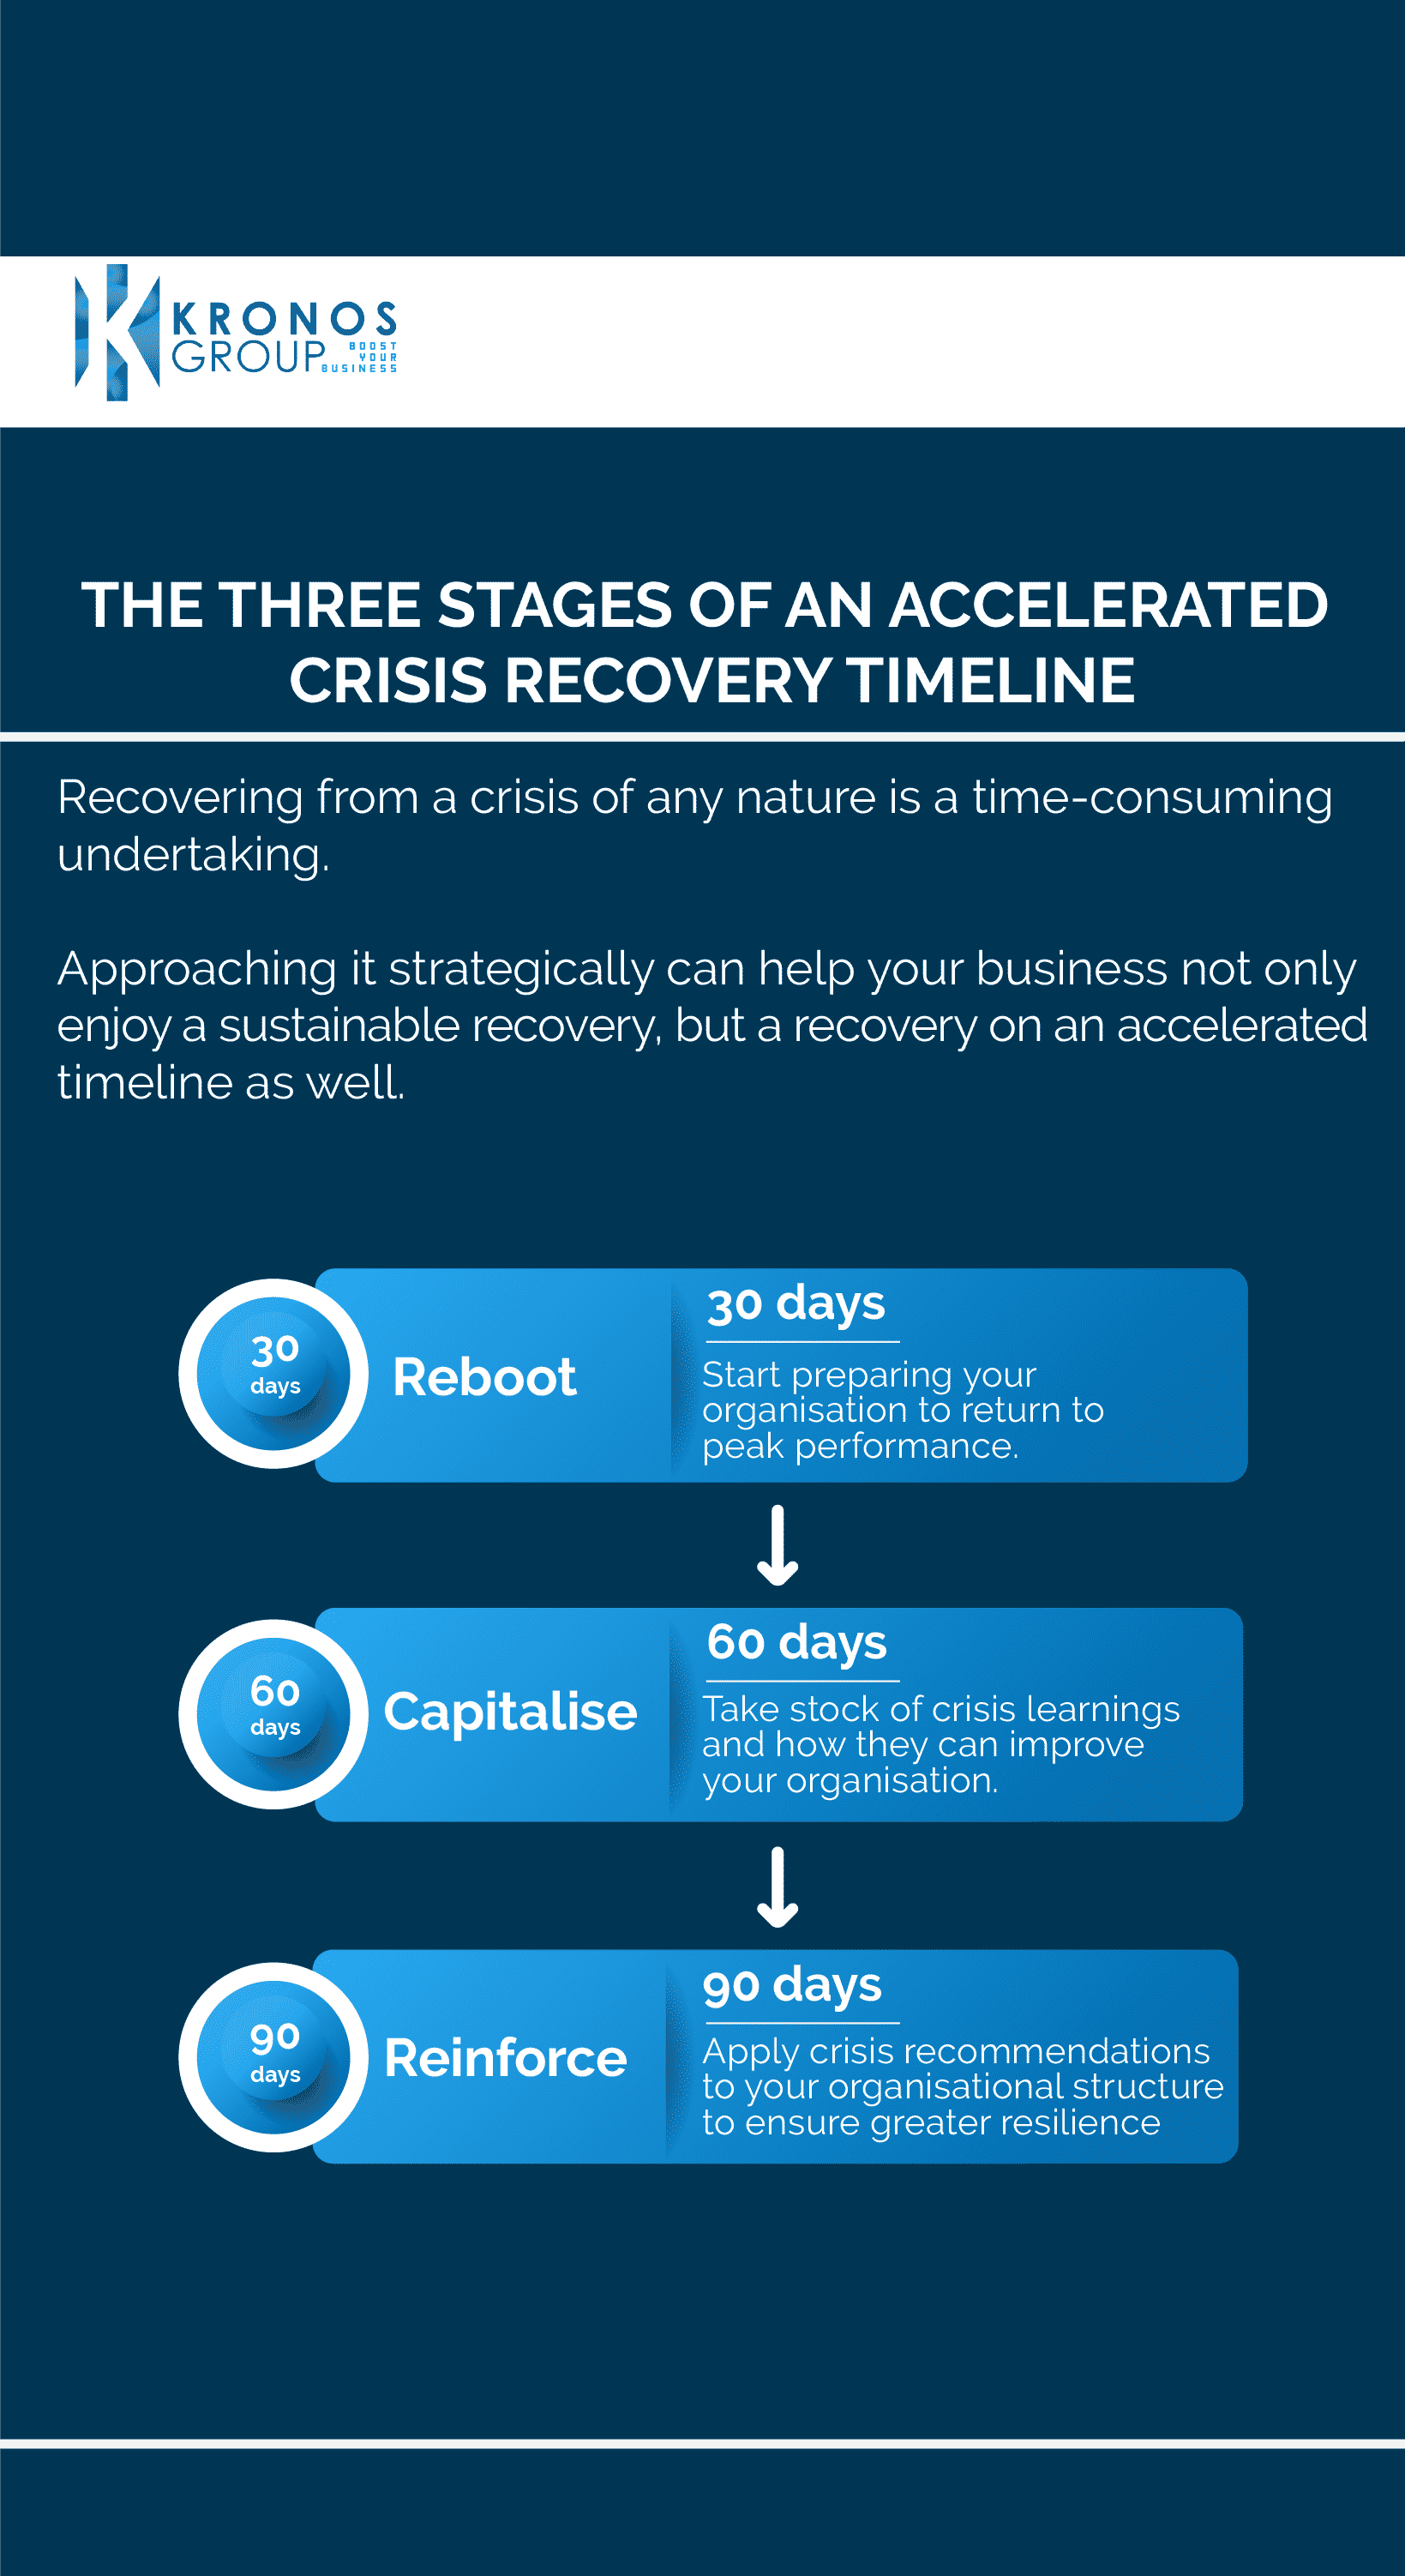 The three stages of an accelerated crisis recovery timeline